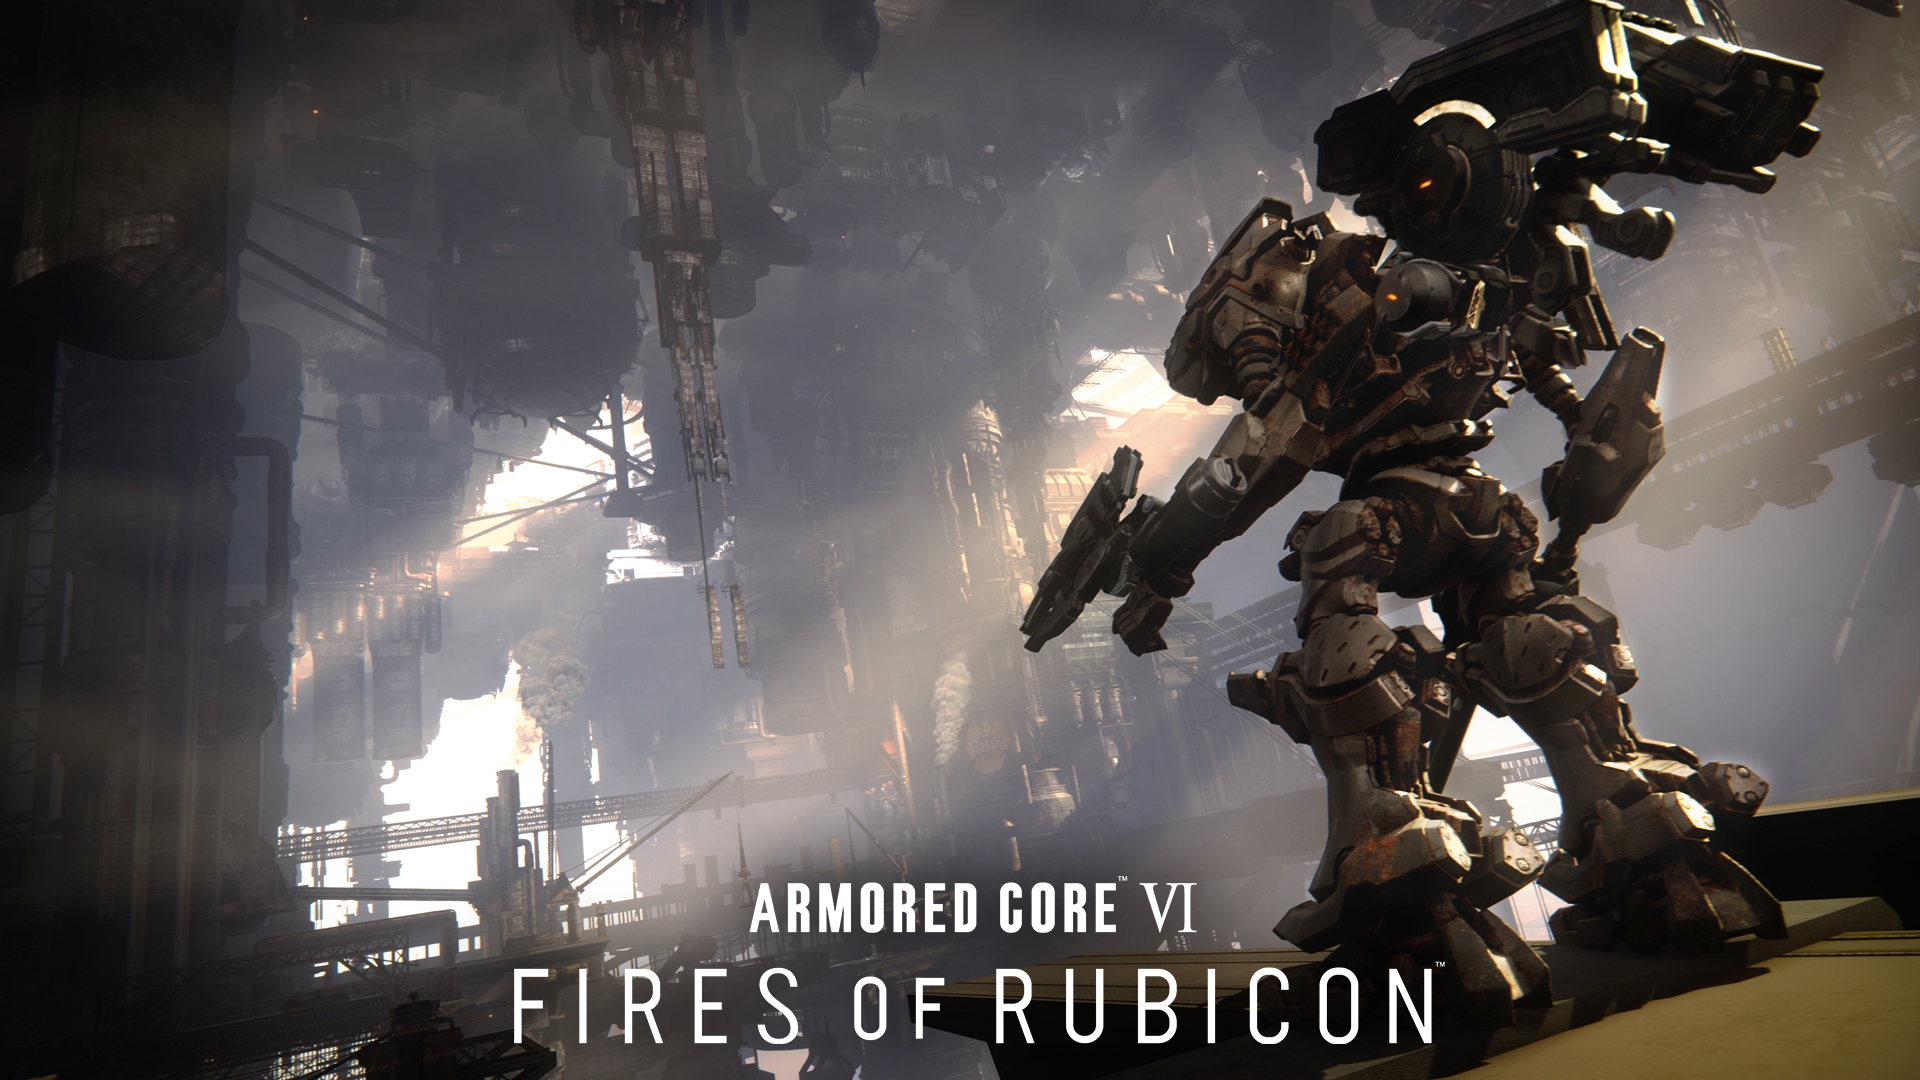 Armoured Core VI Fires of rubicon